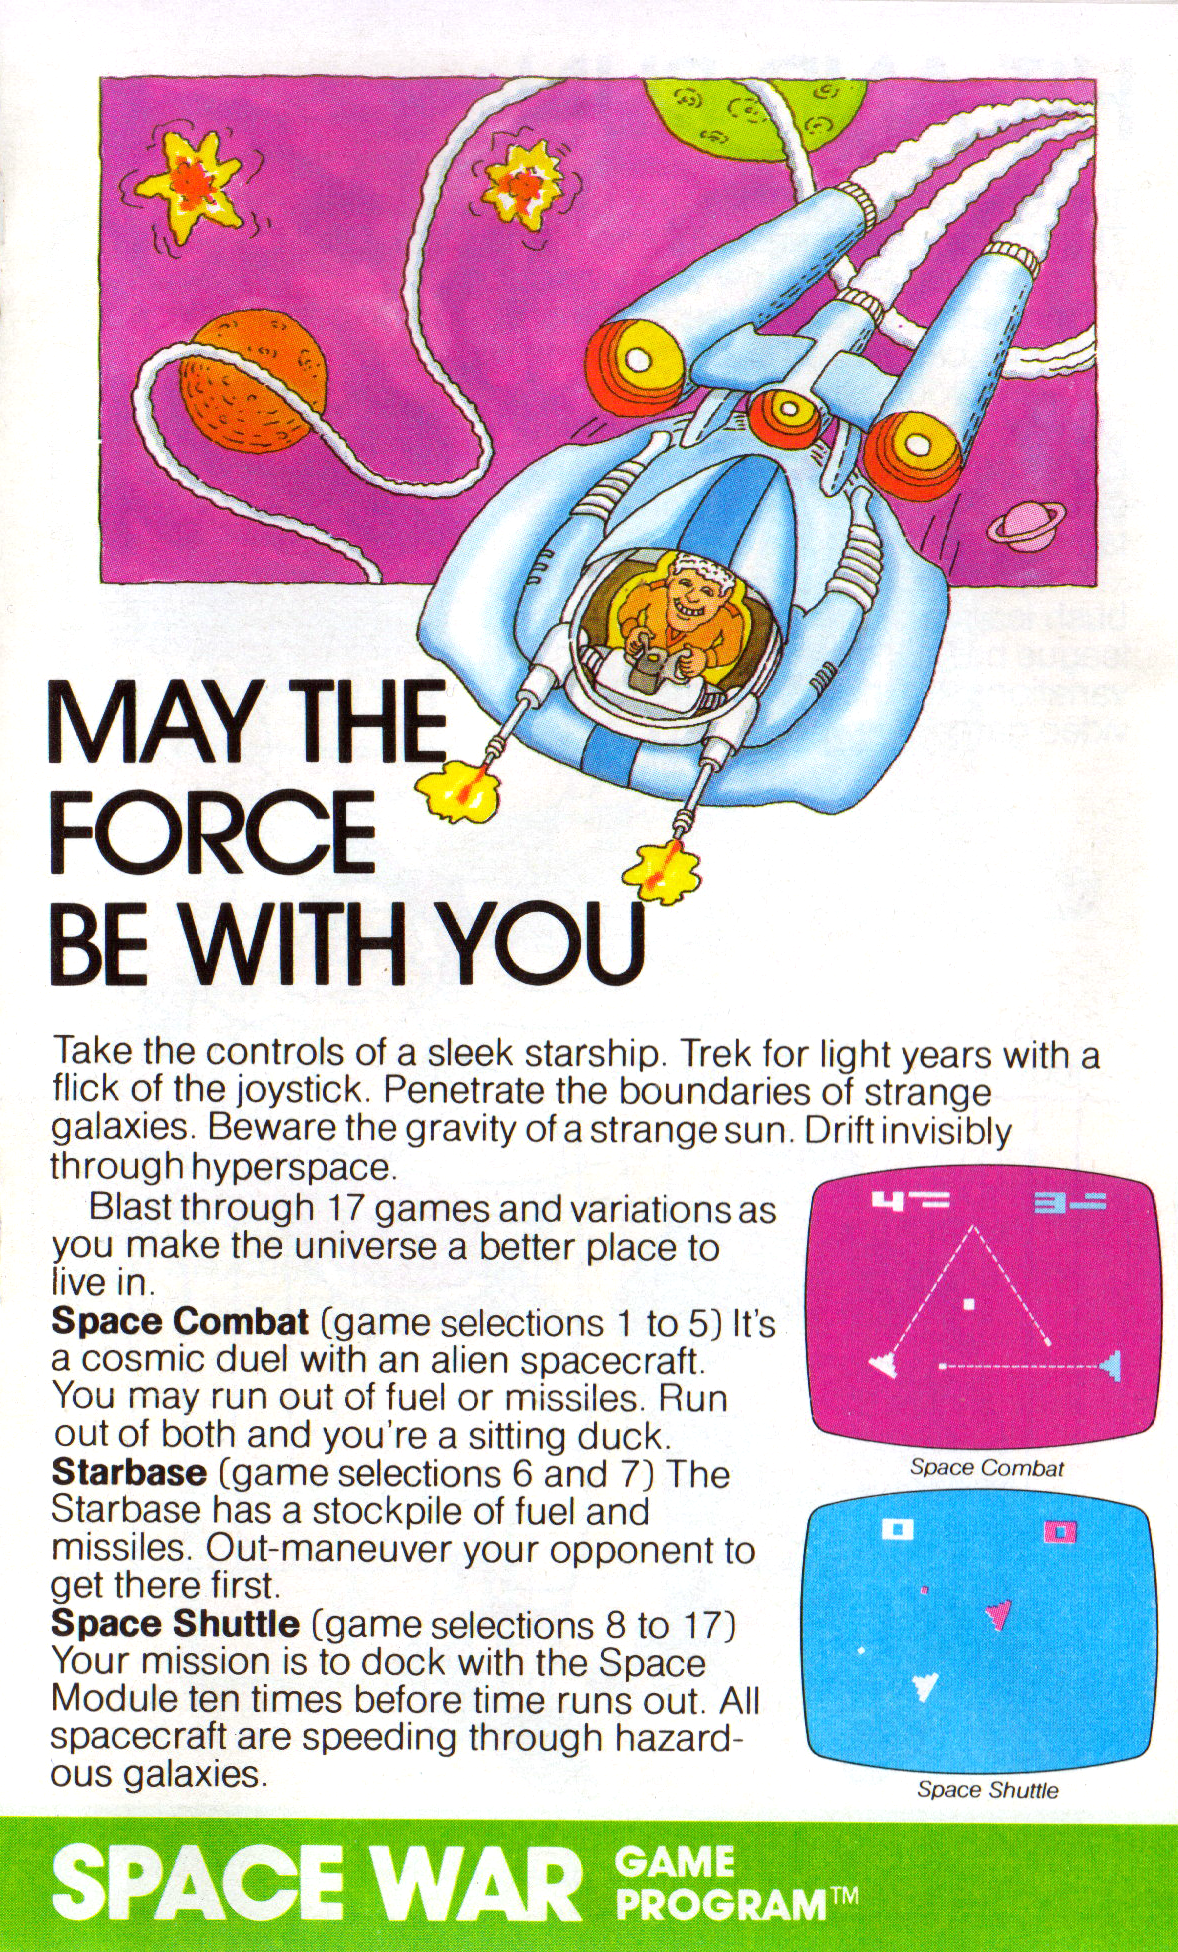 Space War, a video game for the Atari VCS